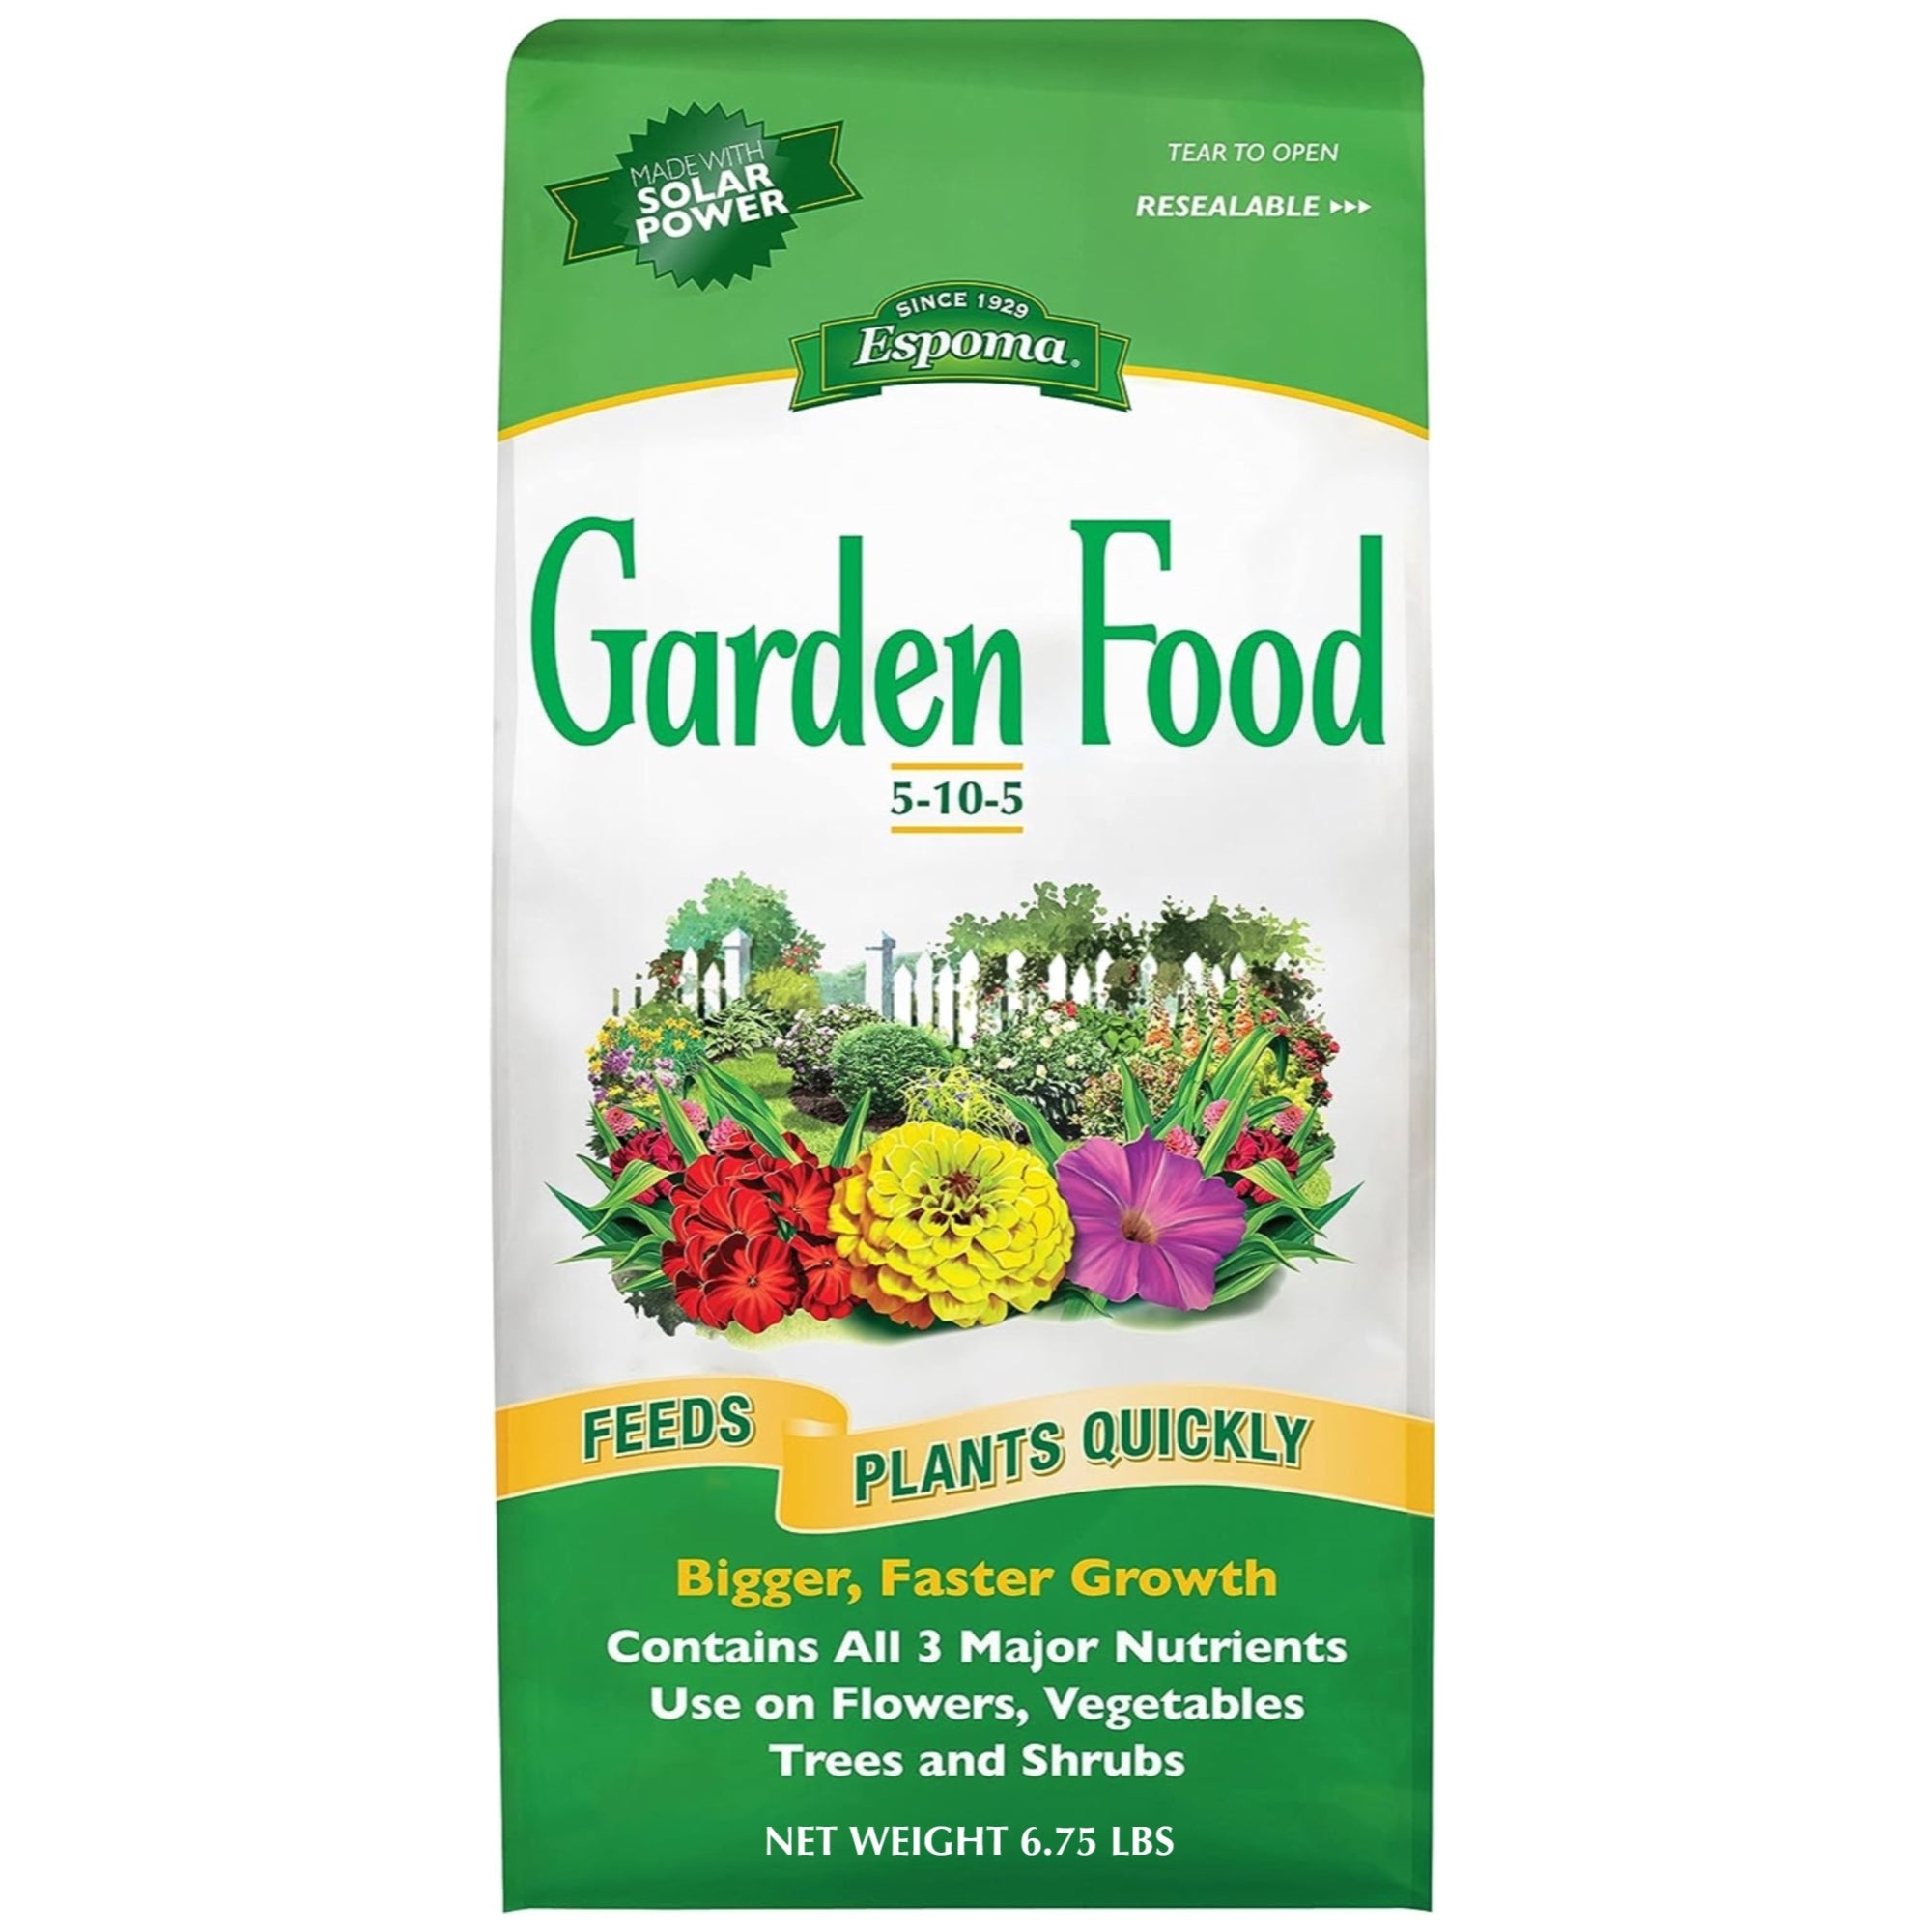 Espoma Garden Food 5-10-5 General Purpose Plant Food for Herbs and Vegetables, Feeds Plants Quickly, 6.75lbs